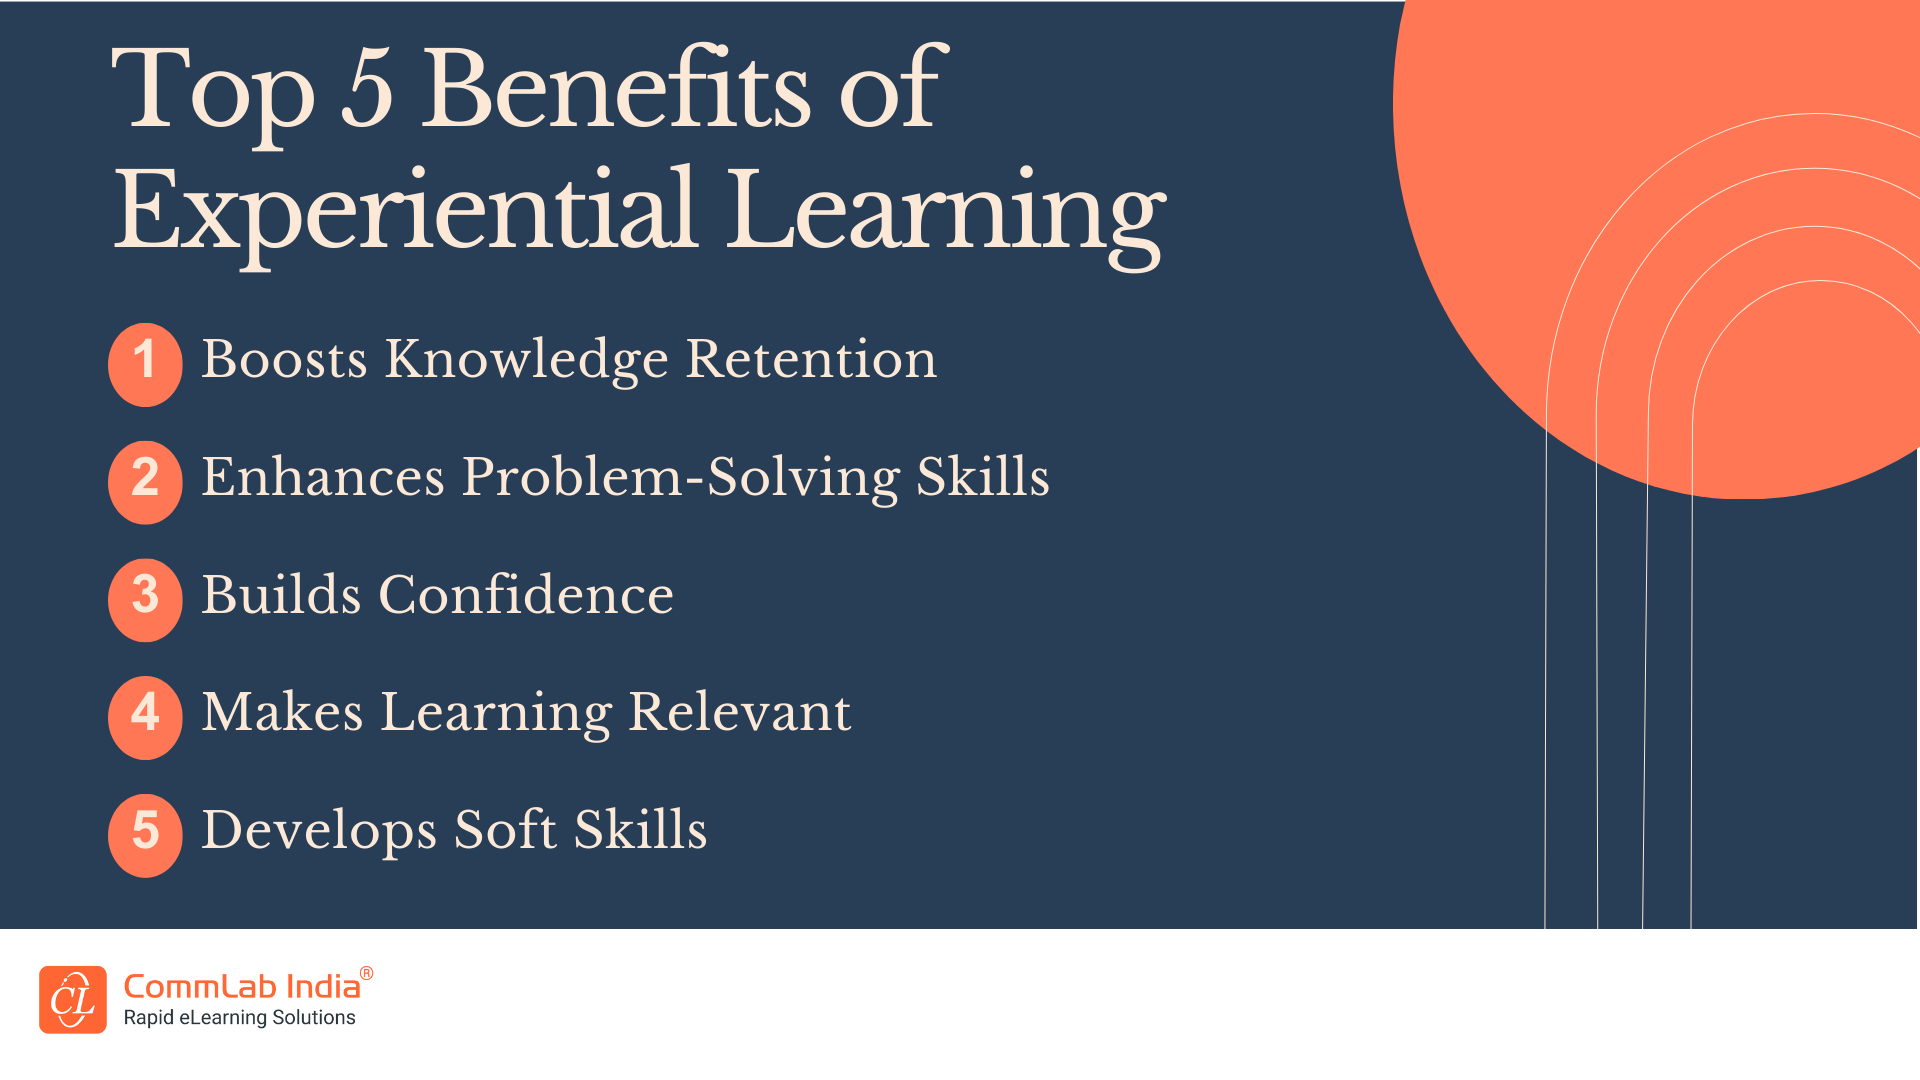 Top 5 Benefits of Experiential Learning